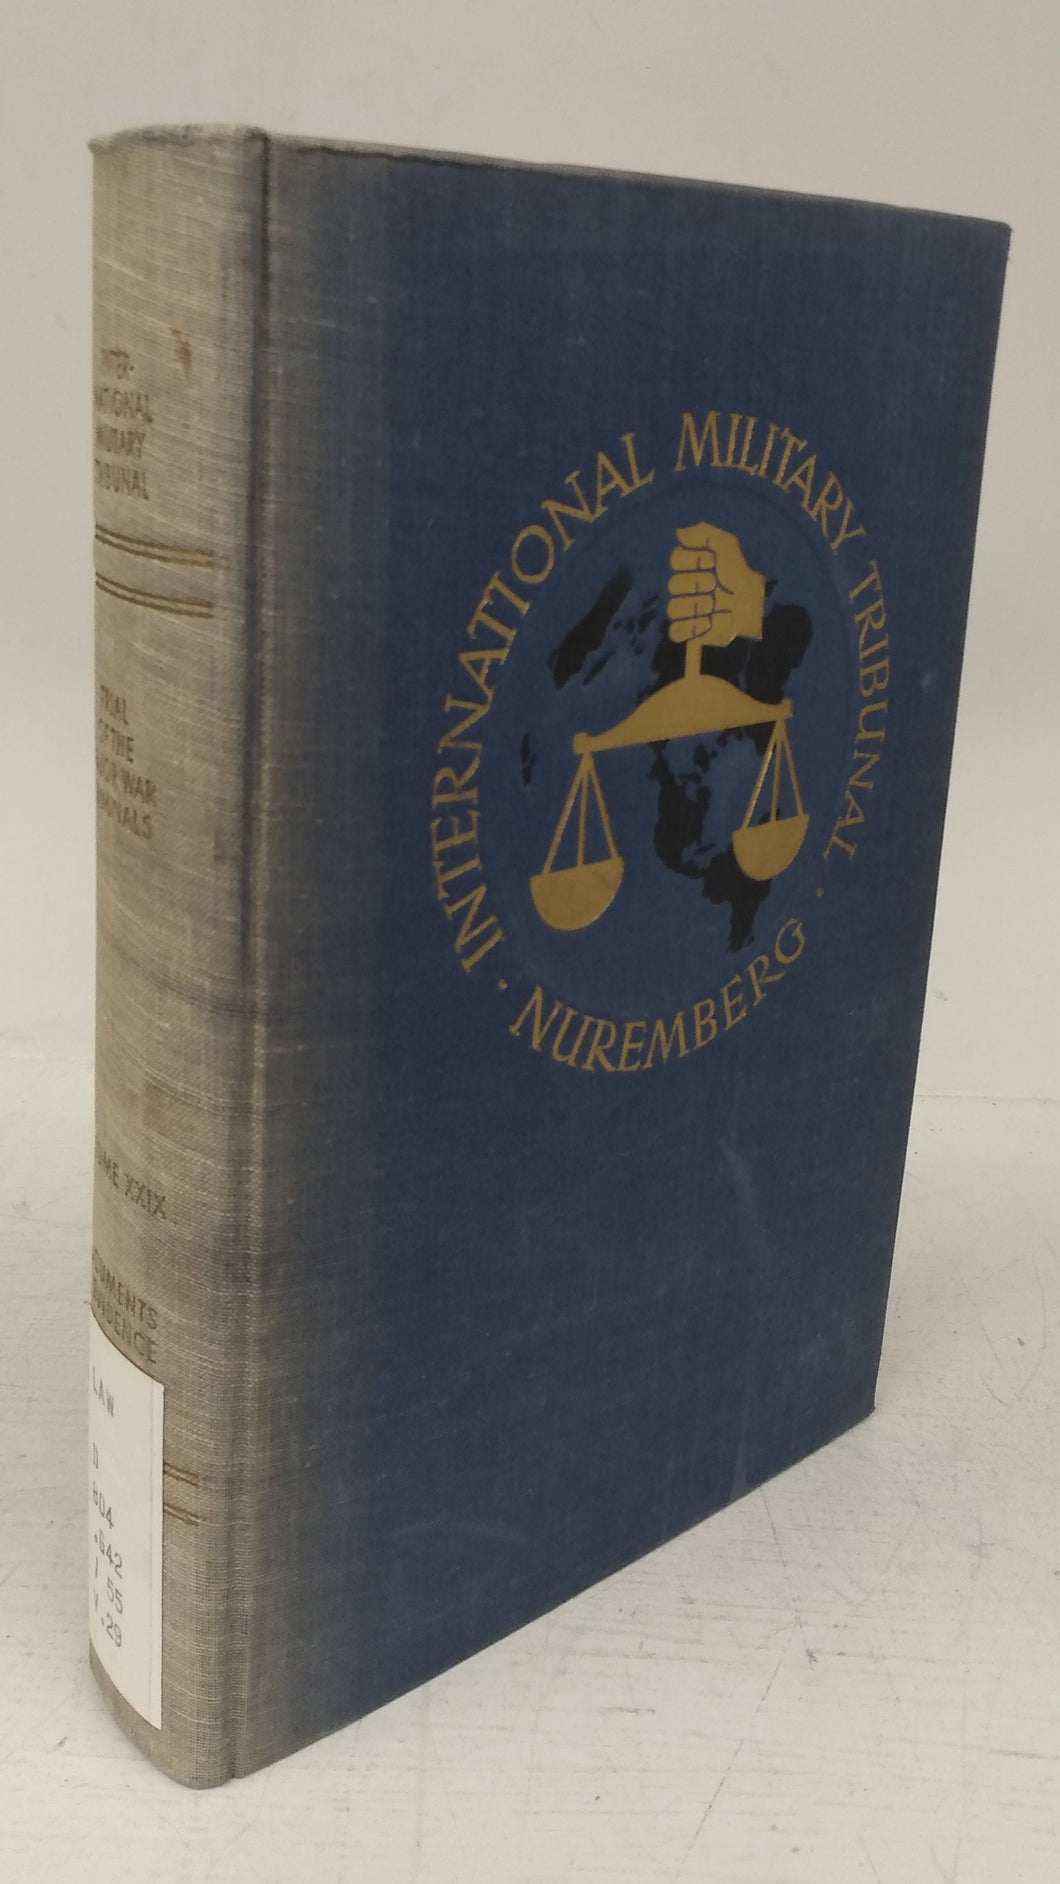 Trial of the Major War Criminals before the International Military Tribunal, Nuremberg, 14 November 1945 - 1 October 1946 (Volume XXIX - Documents and Other Material in Evidence Nos 1850-PS to 2233-PS)